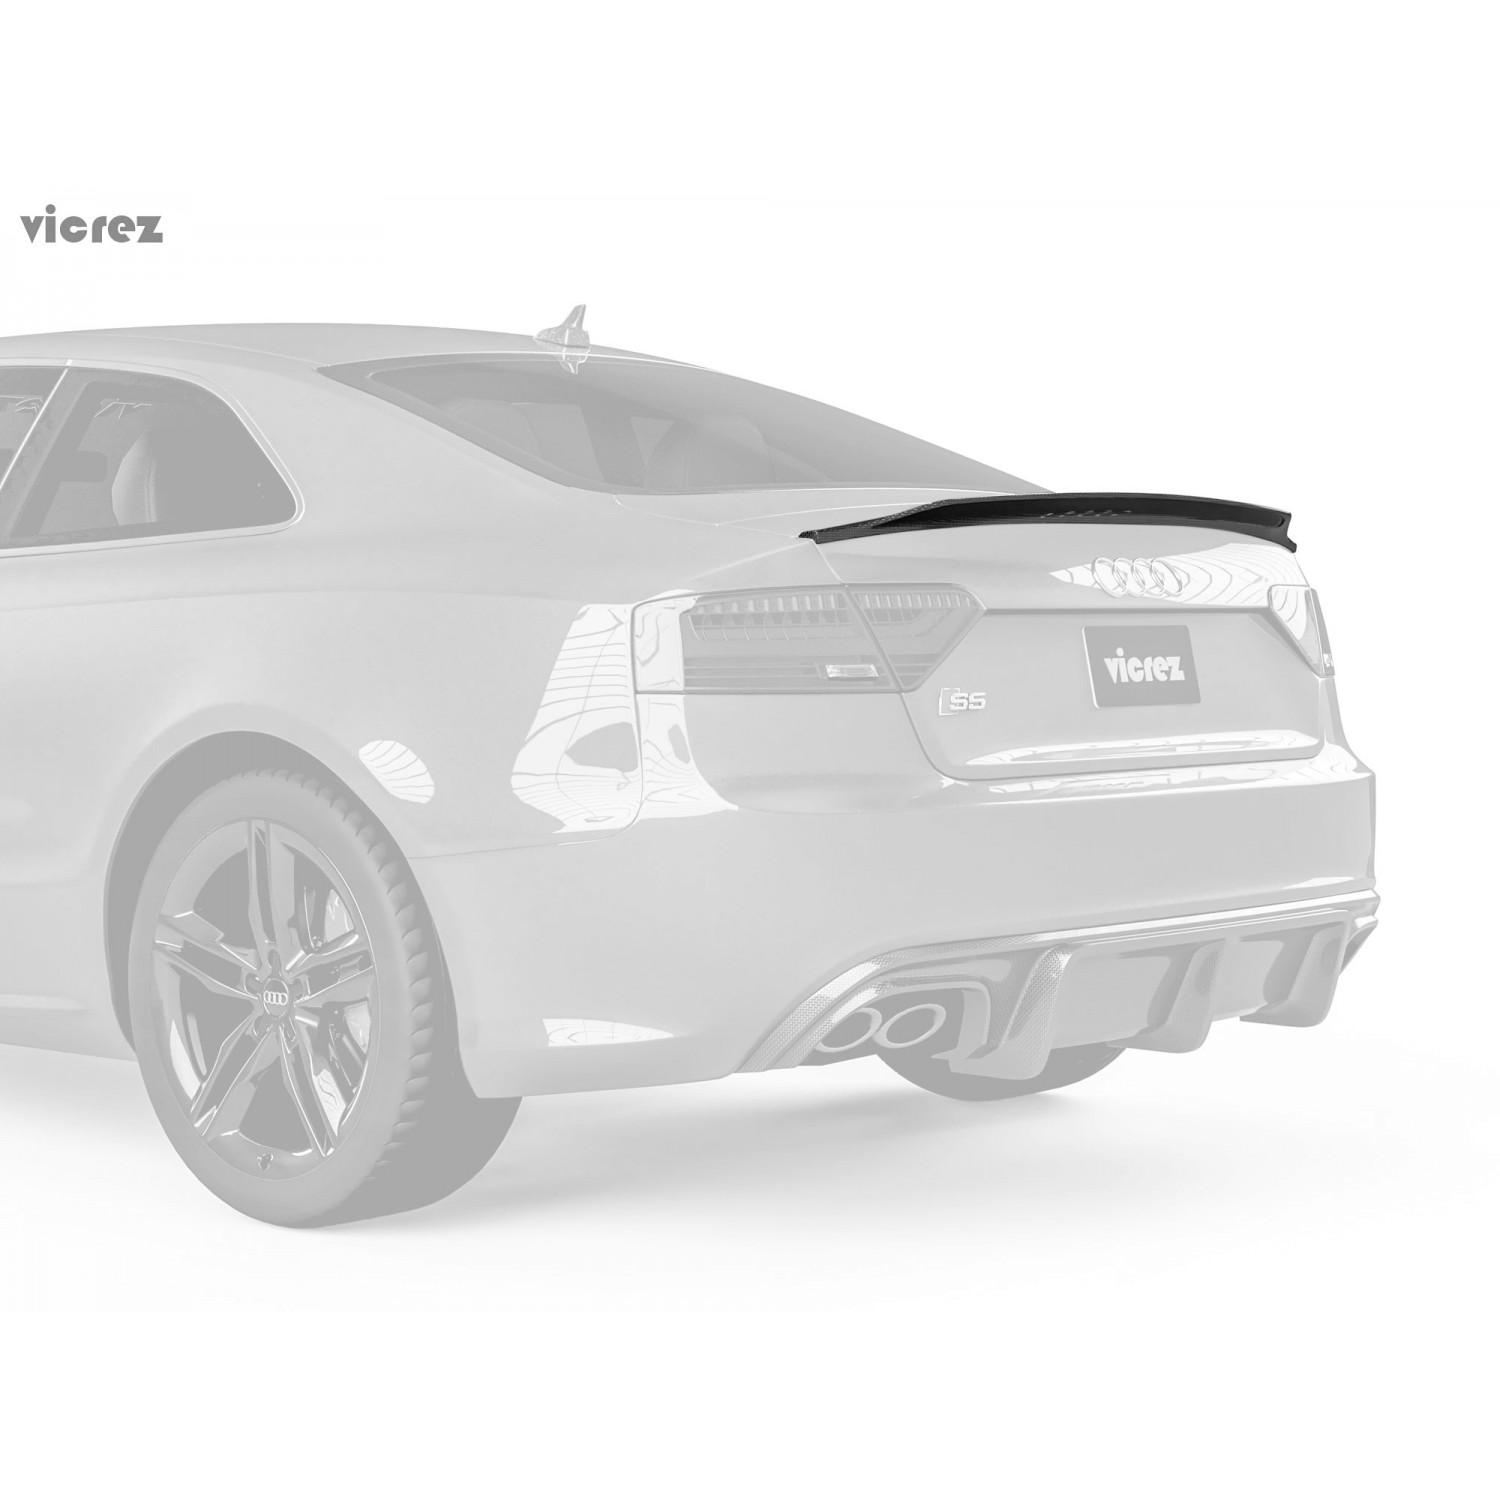 Spoiler wings for Audi A5 - SC Styling